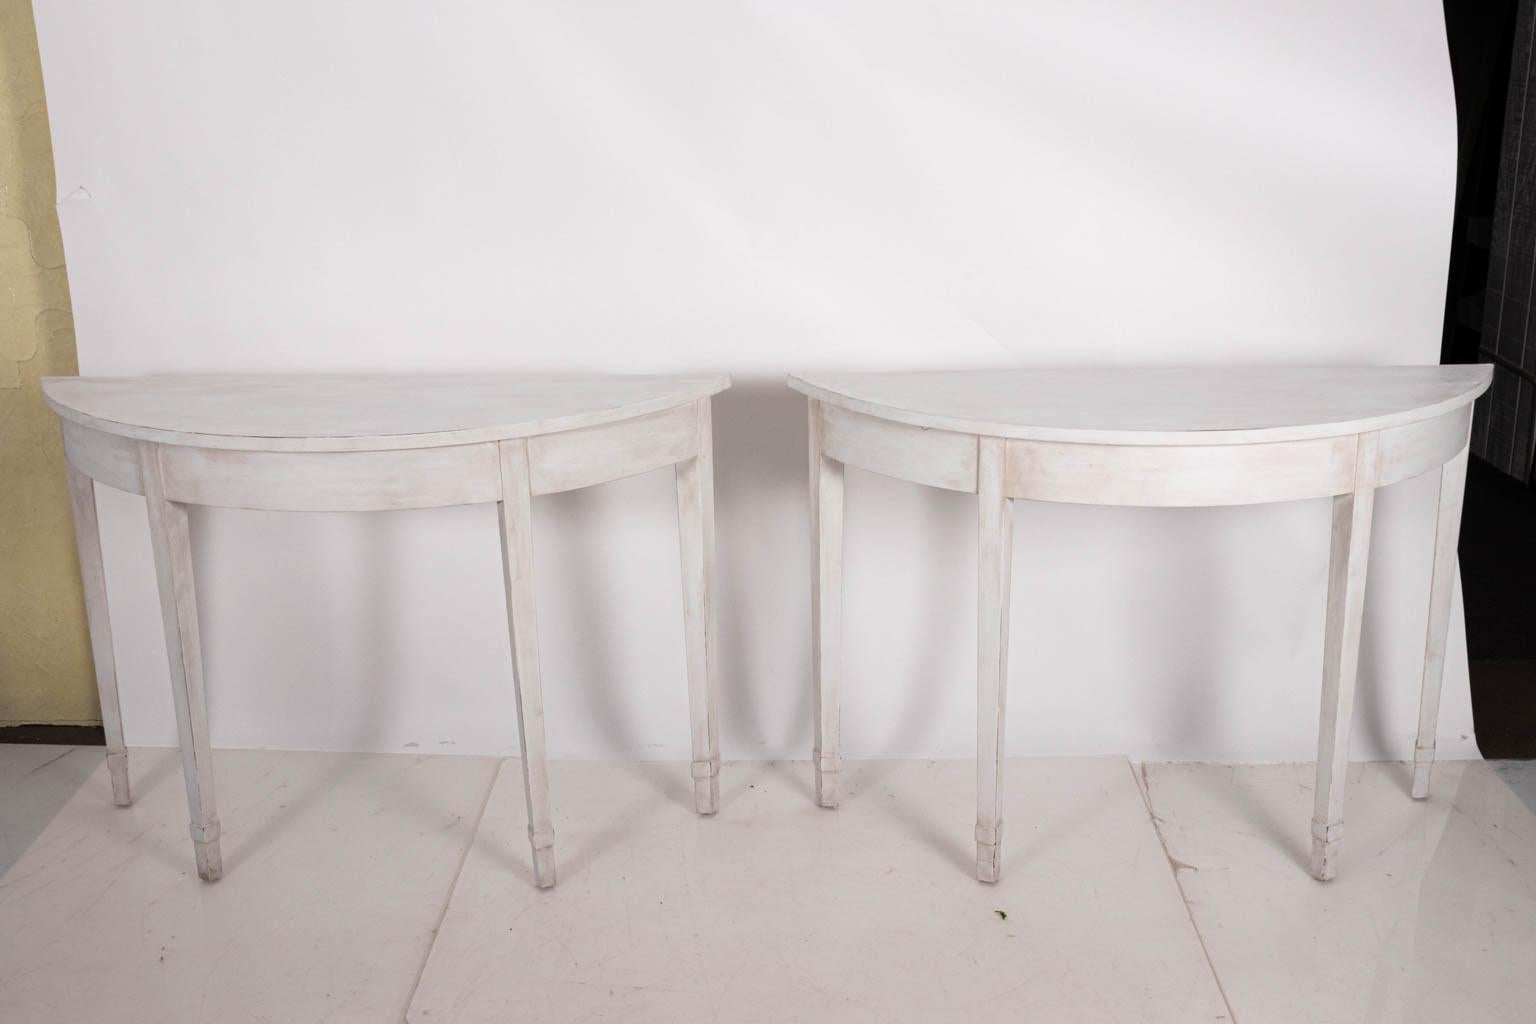 Pair of white painted demilune console tables in the Gustavian style, circa 1940s. The piece also features plain tapered legs and comes in an antique patina finish. Please note of wear consistent with age to the wood including: minor chips and dents